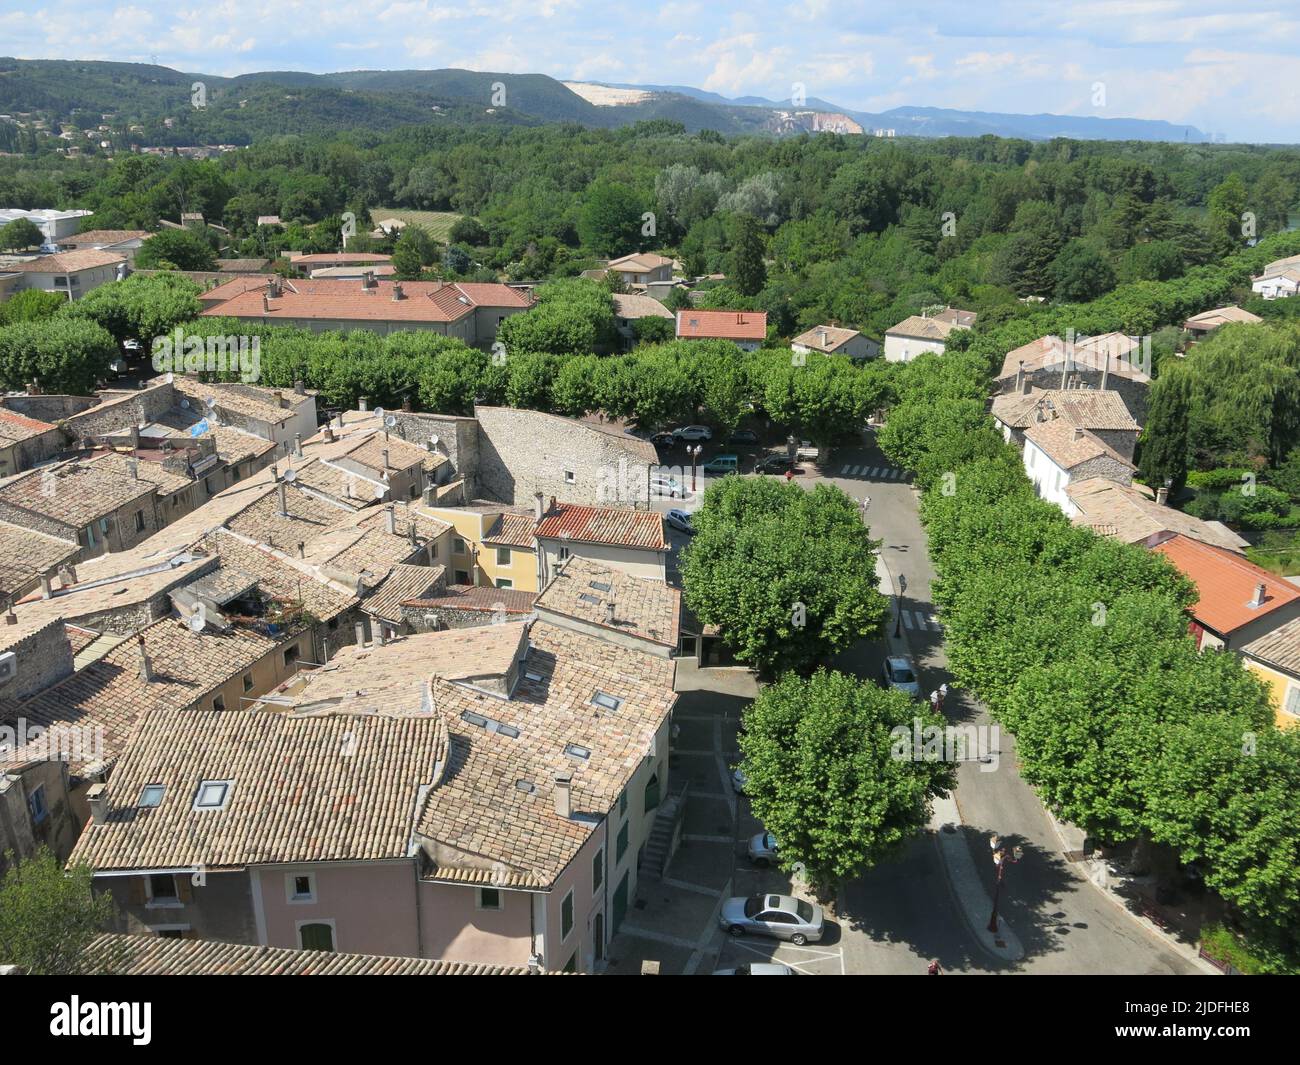 View from the observation deck, Point de Vue, over the rooftops of the old town of Viviers & surrounding countryside of the Ardeche, southern France. Stock Photo